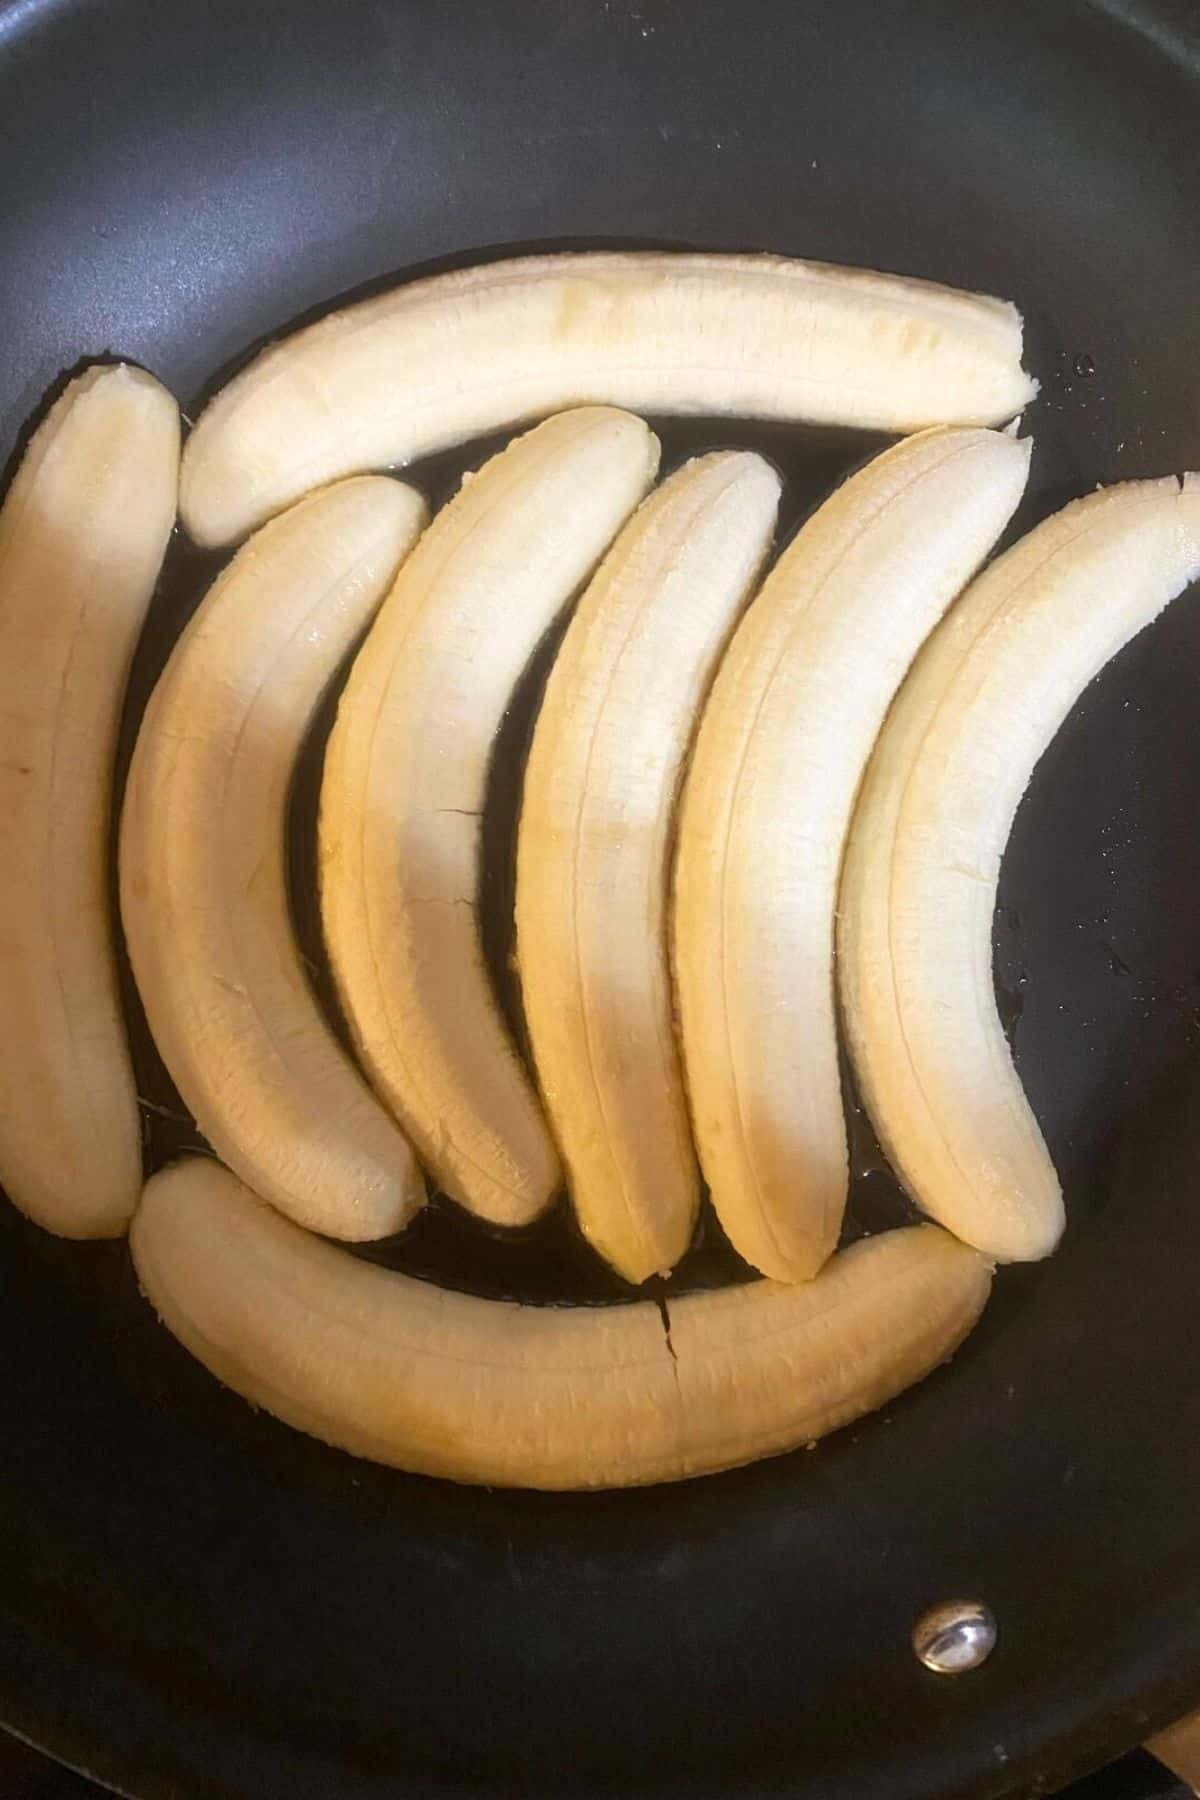 An overhead view of sliced bananas slice side down on a pan